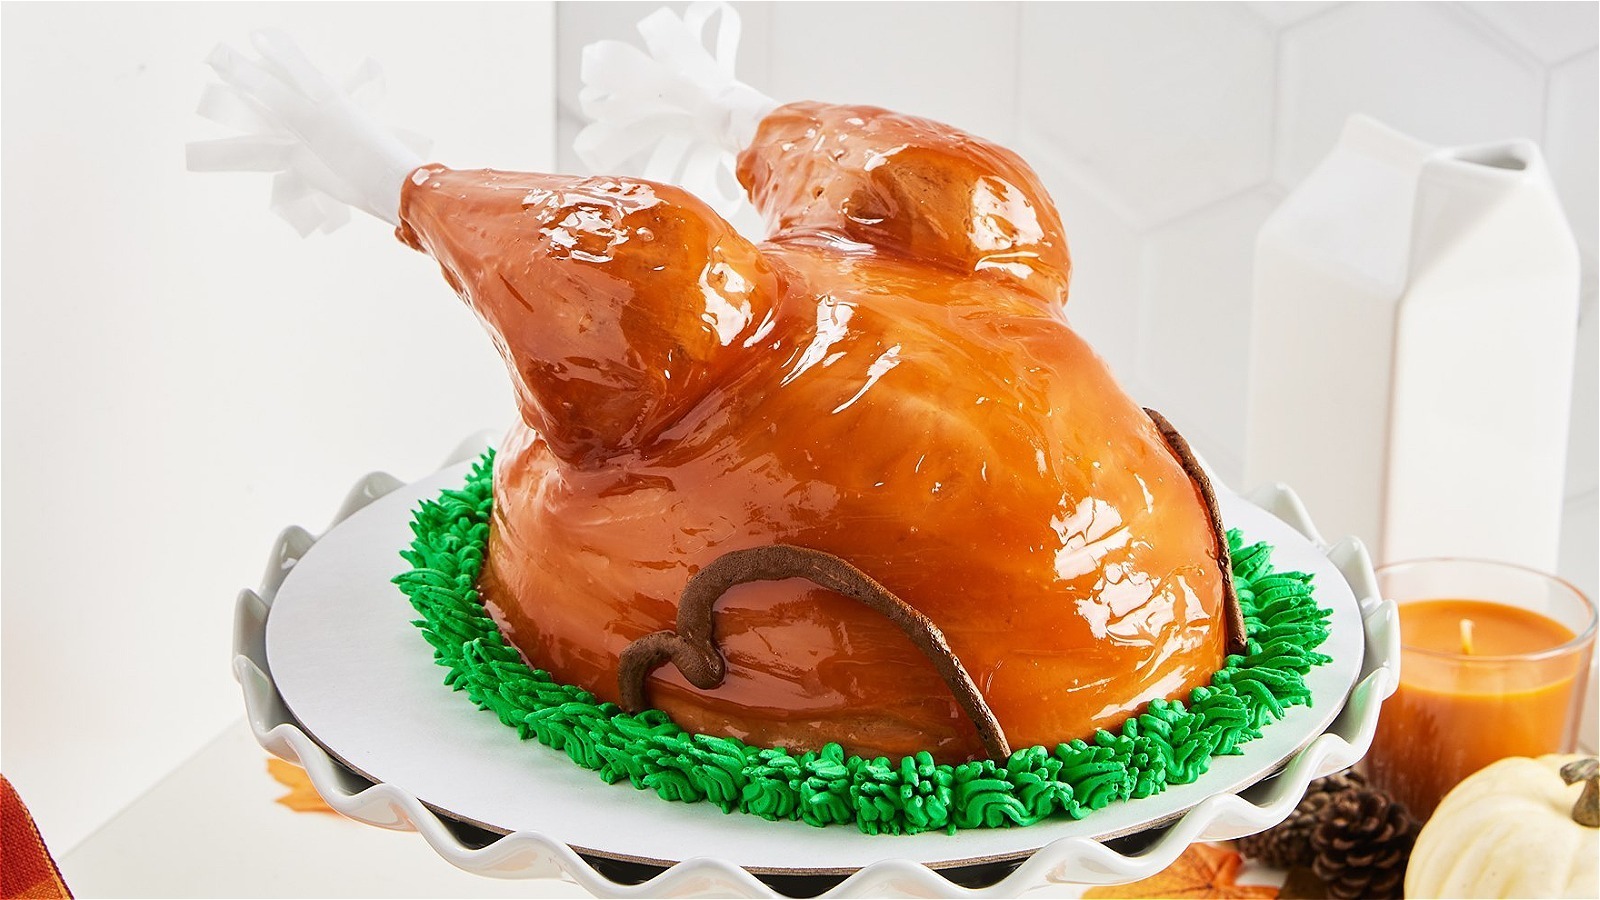 https://www.mashed.com/img/gallery/heres-how-you-can-get-a-baskin-robbins-turkey-cake/l-intro-1667053811.jpg